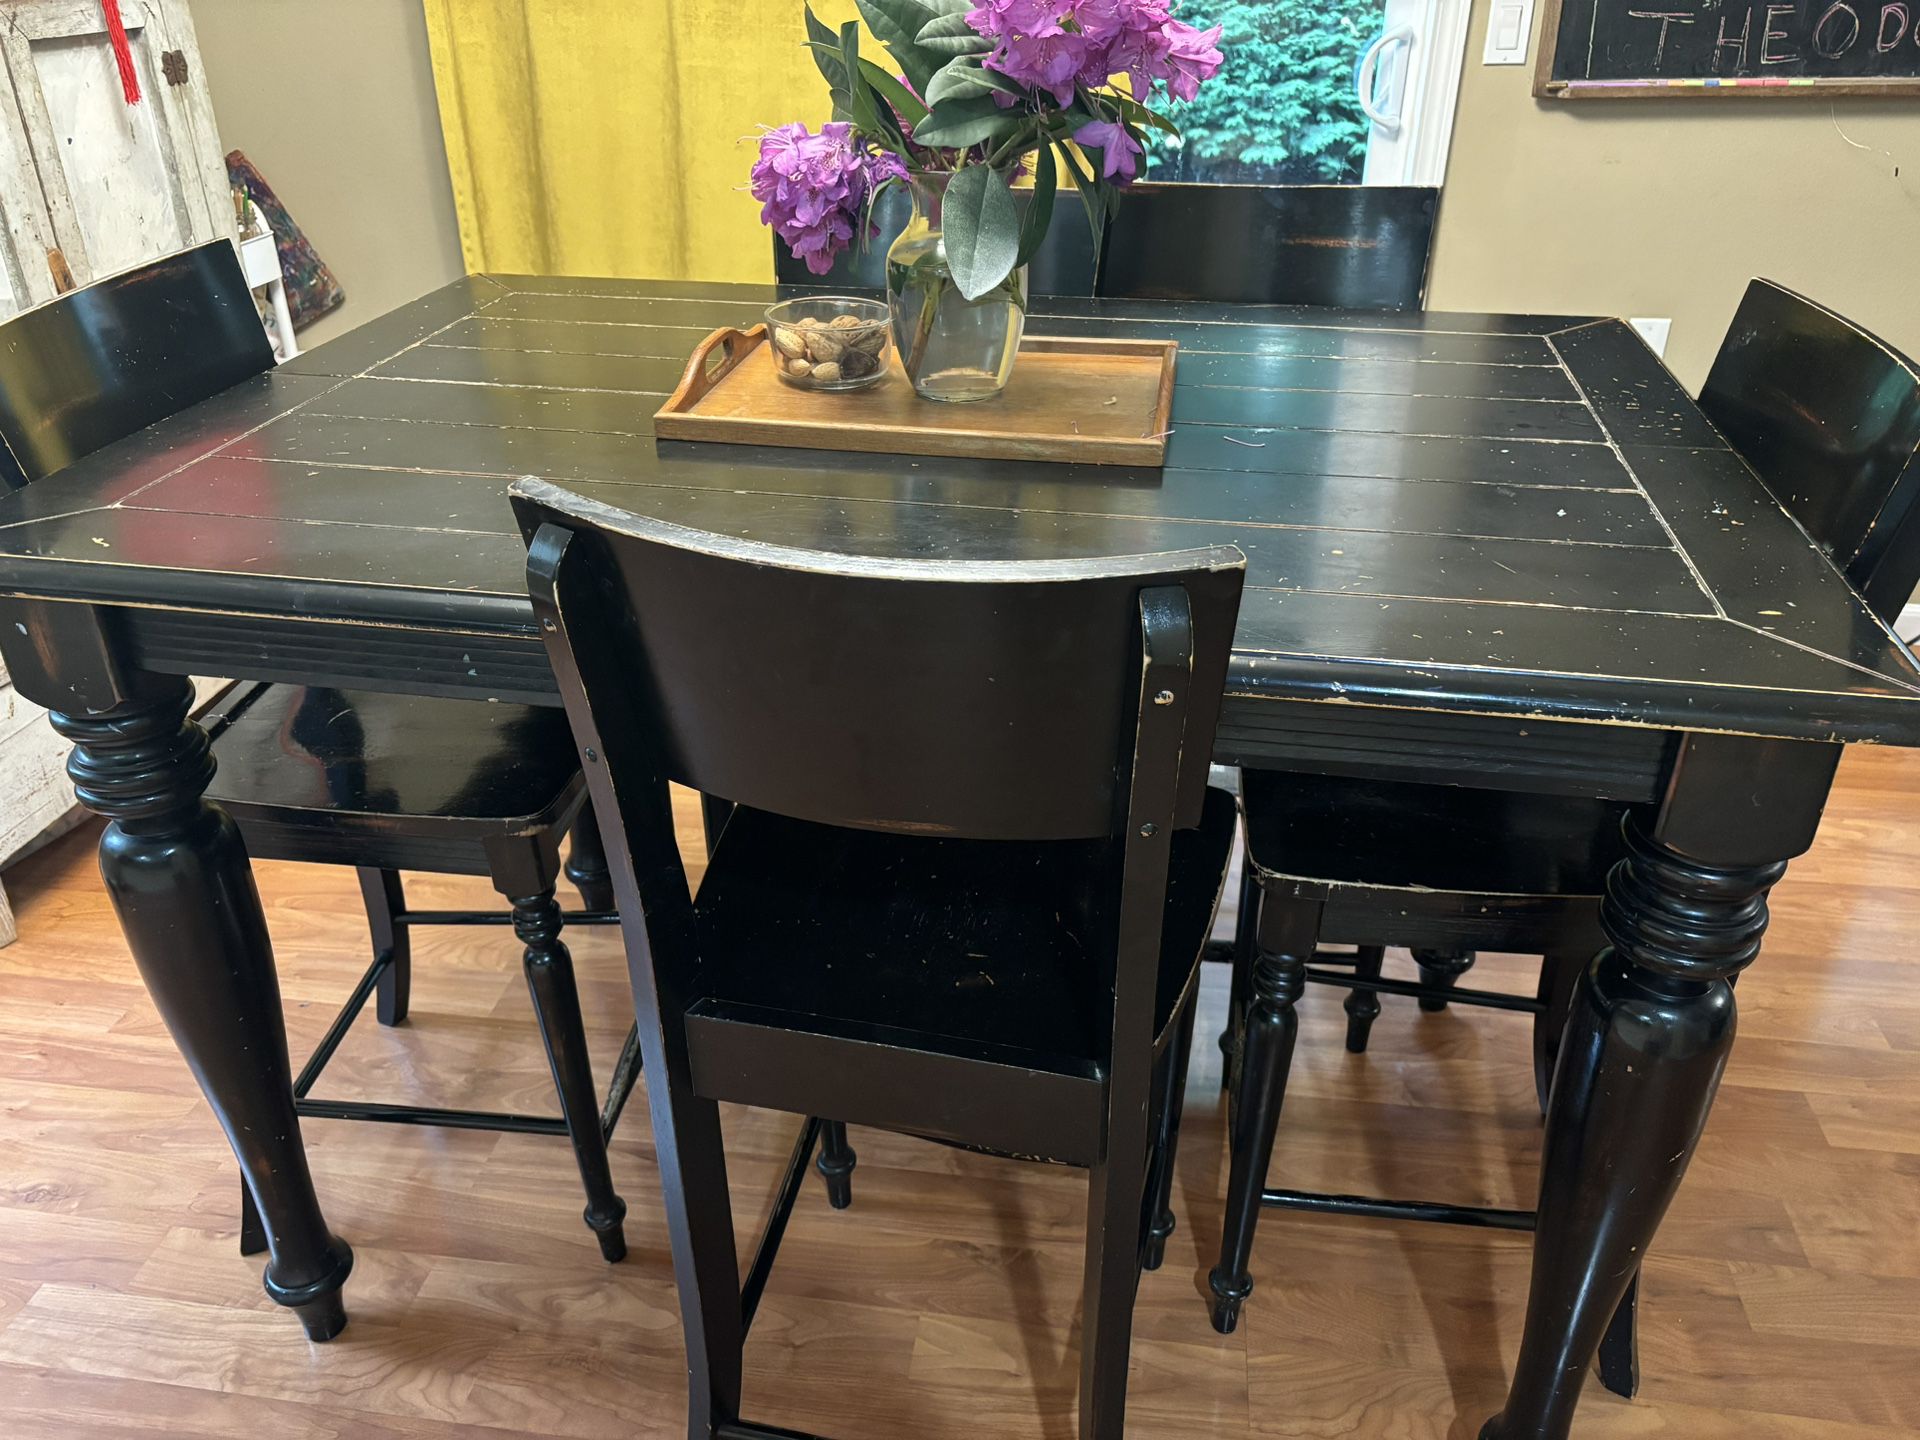 Dinner Table With Leaf, 5 Chairs